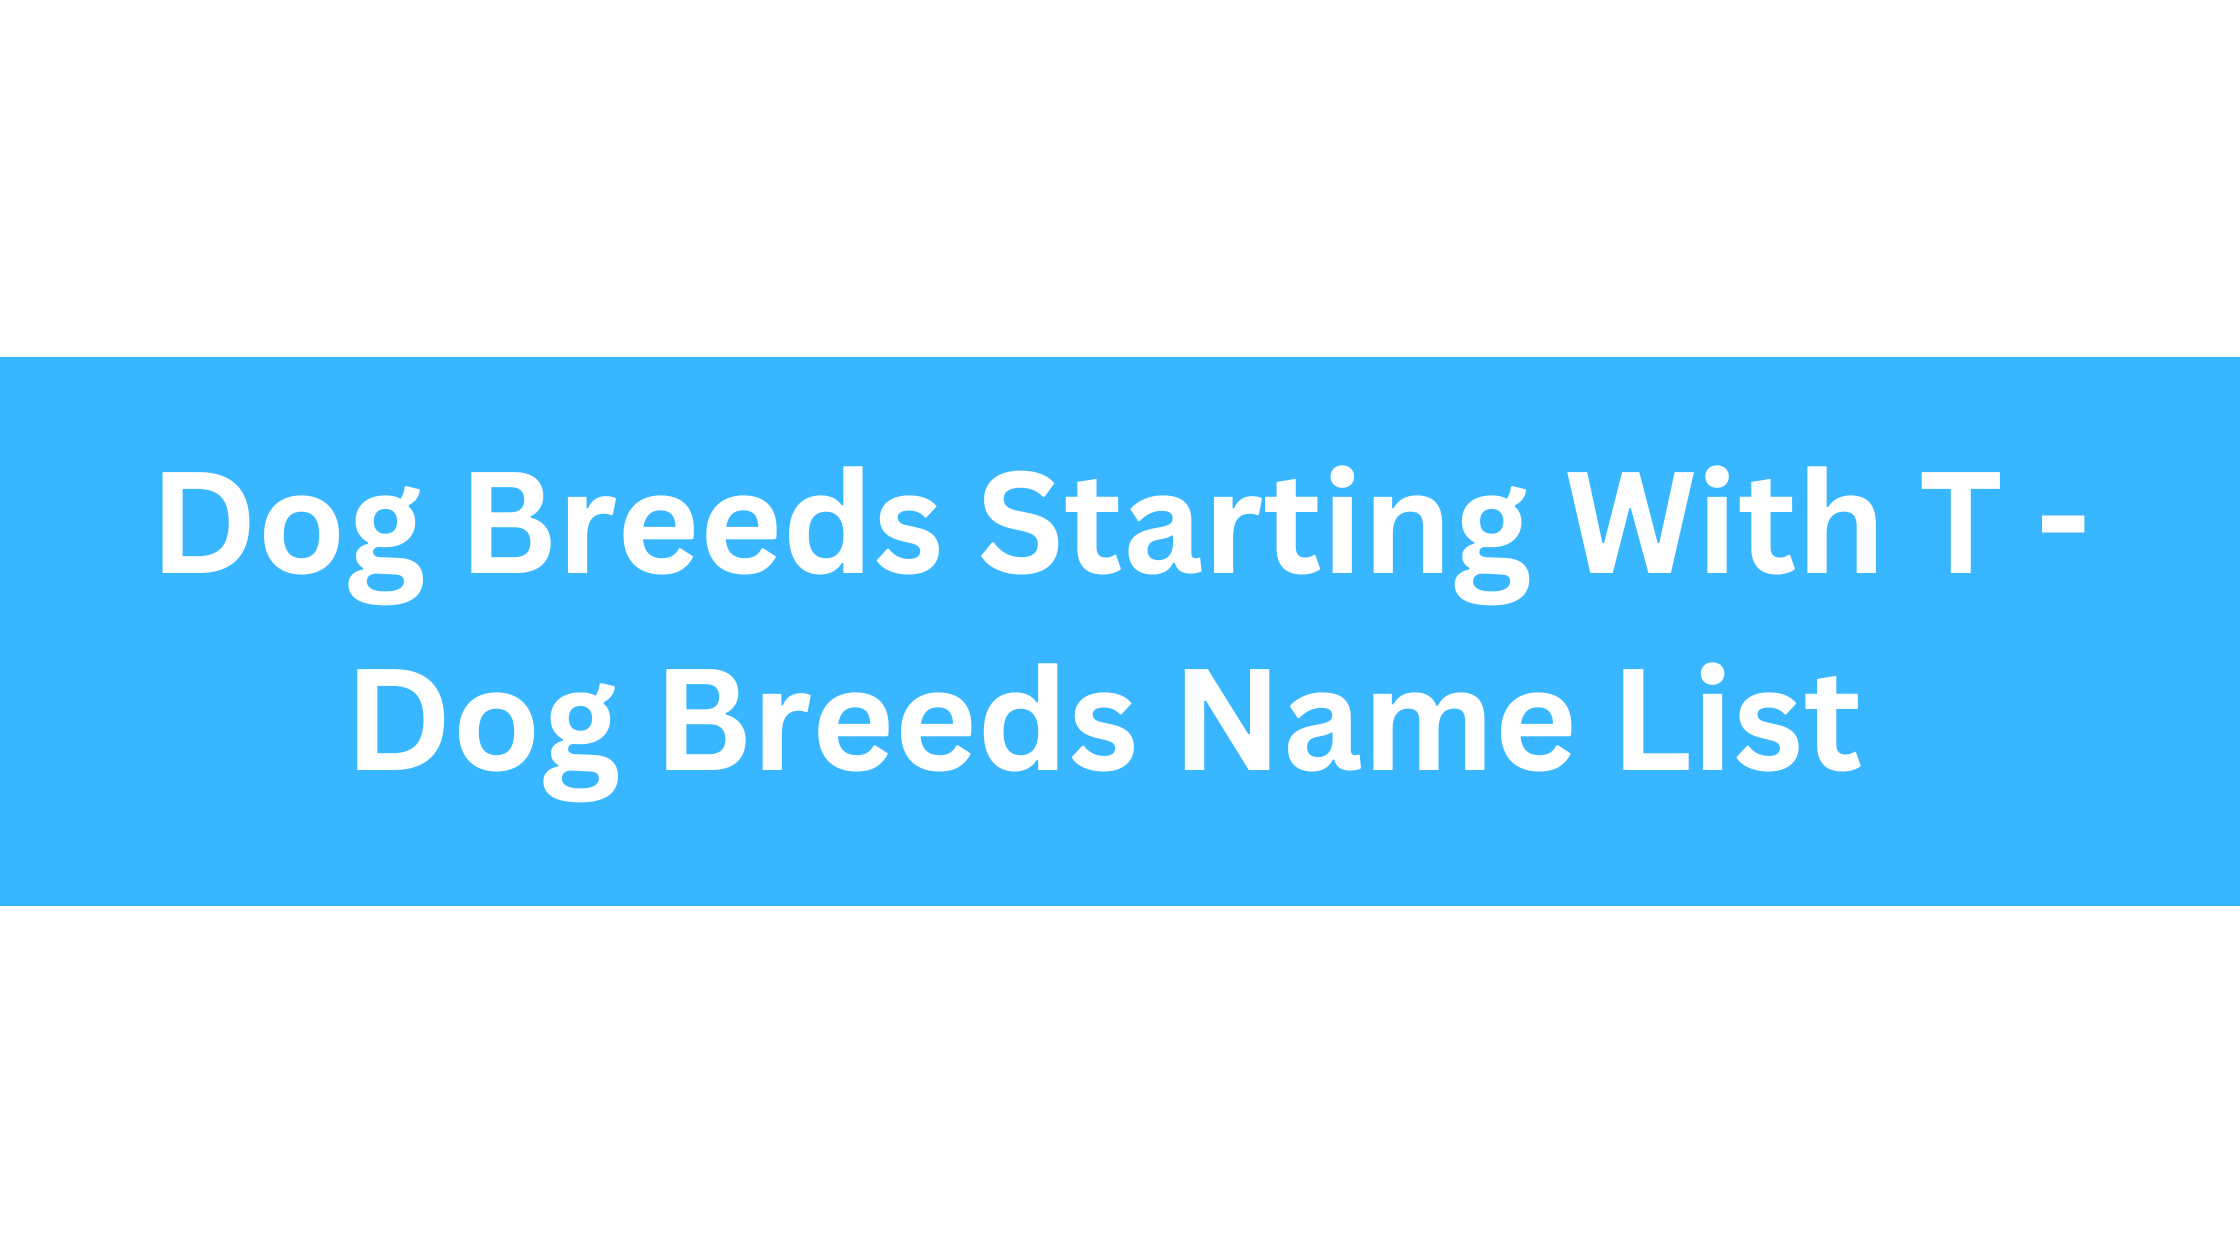 Dog Breeds Starting With T